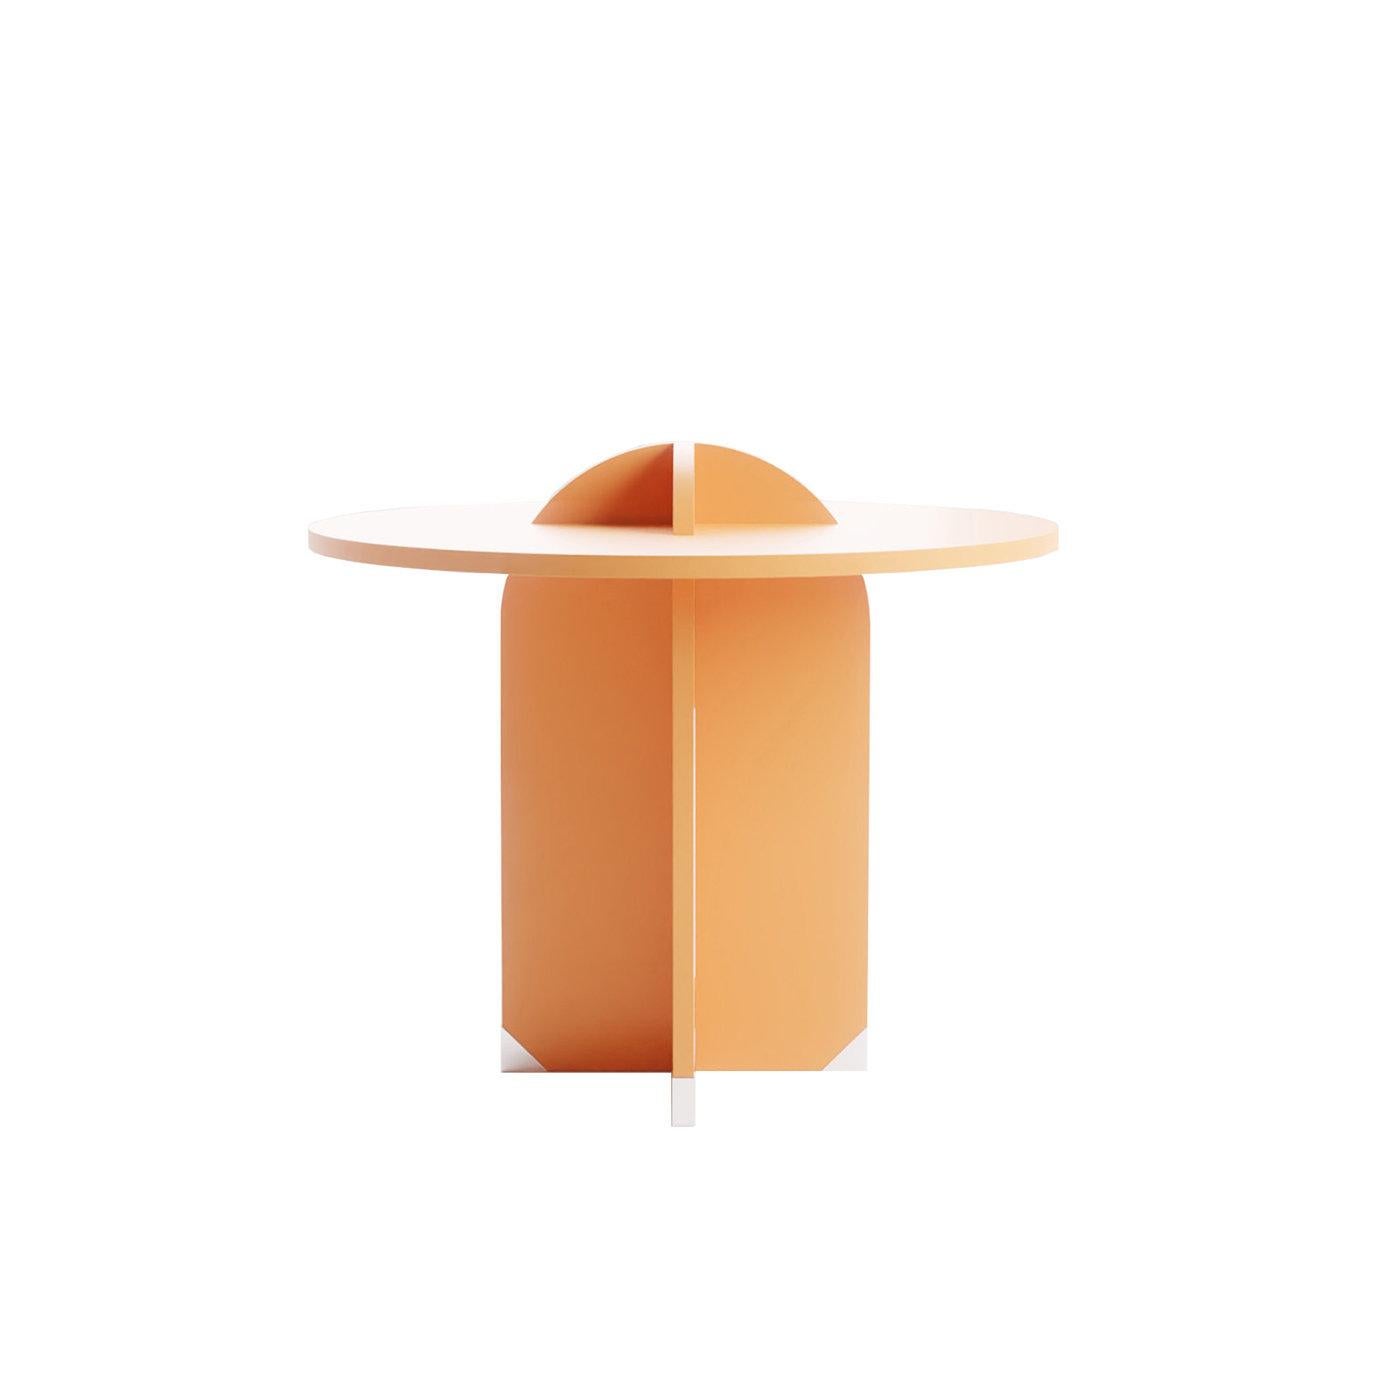 Soft curves and clean lines define the sculptural aesthetic of this coffee table, playfully inspired by round head nails. Its smooth wooden structure lacquered in a soft shade of orange is composed of two supporting, intersecting panels piercing the